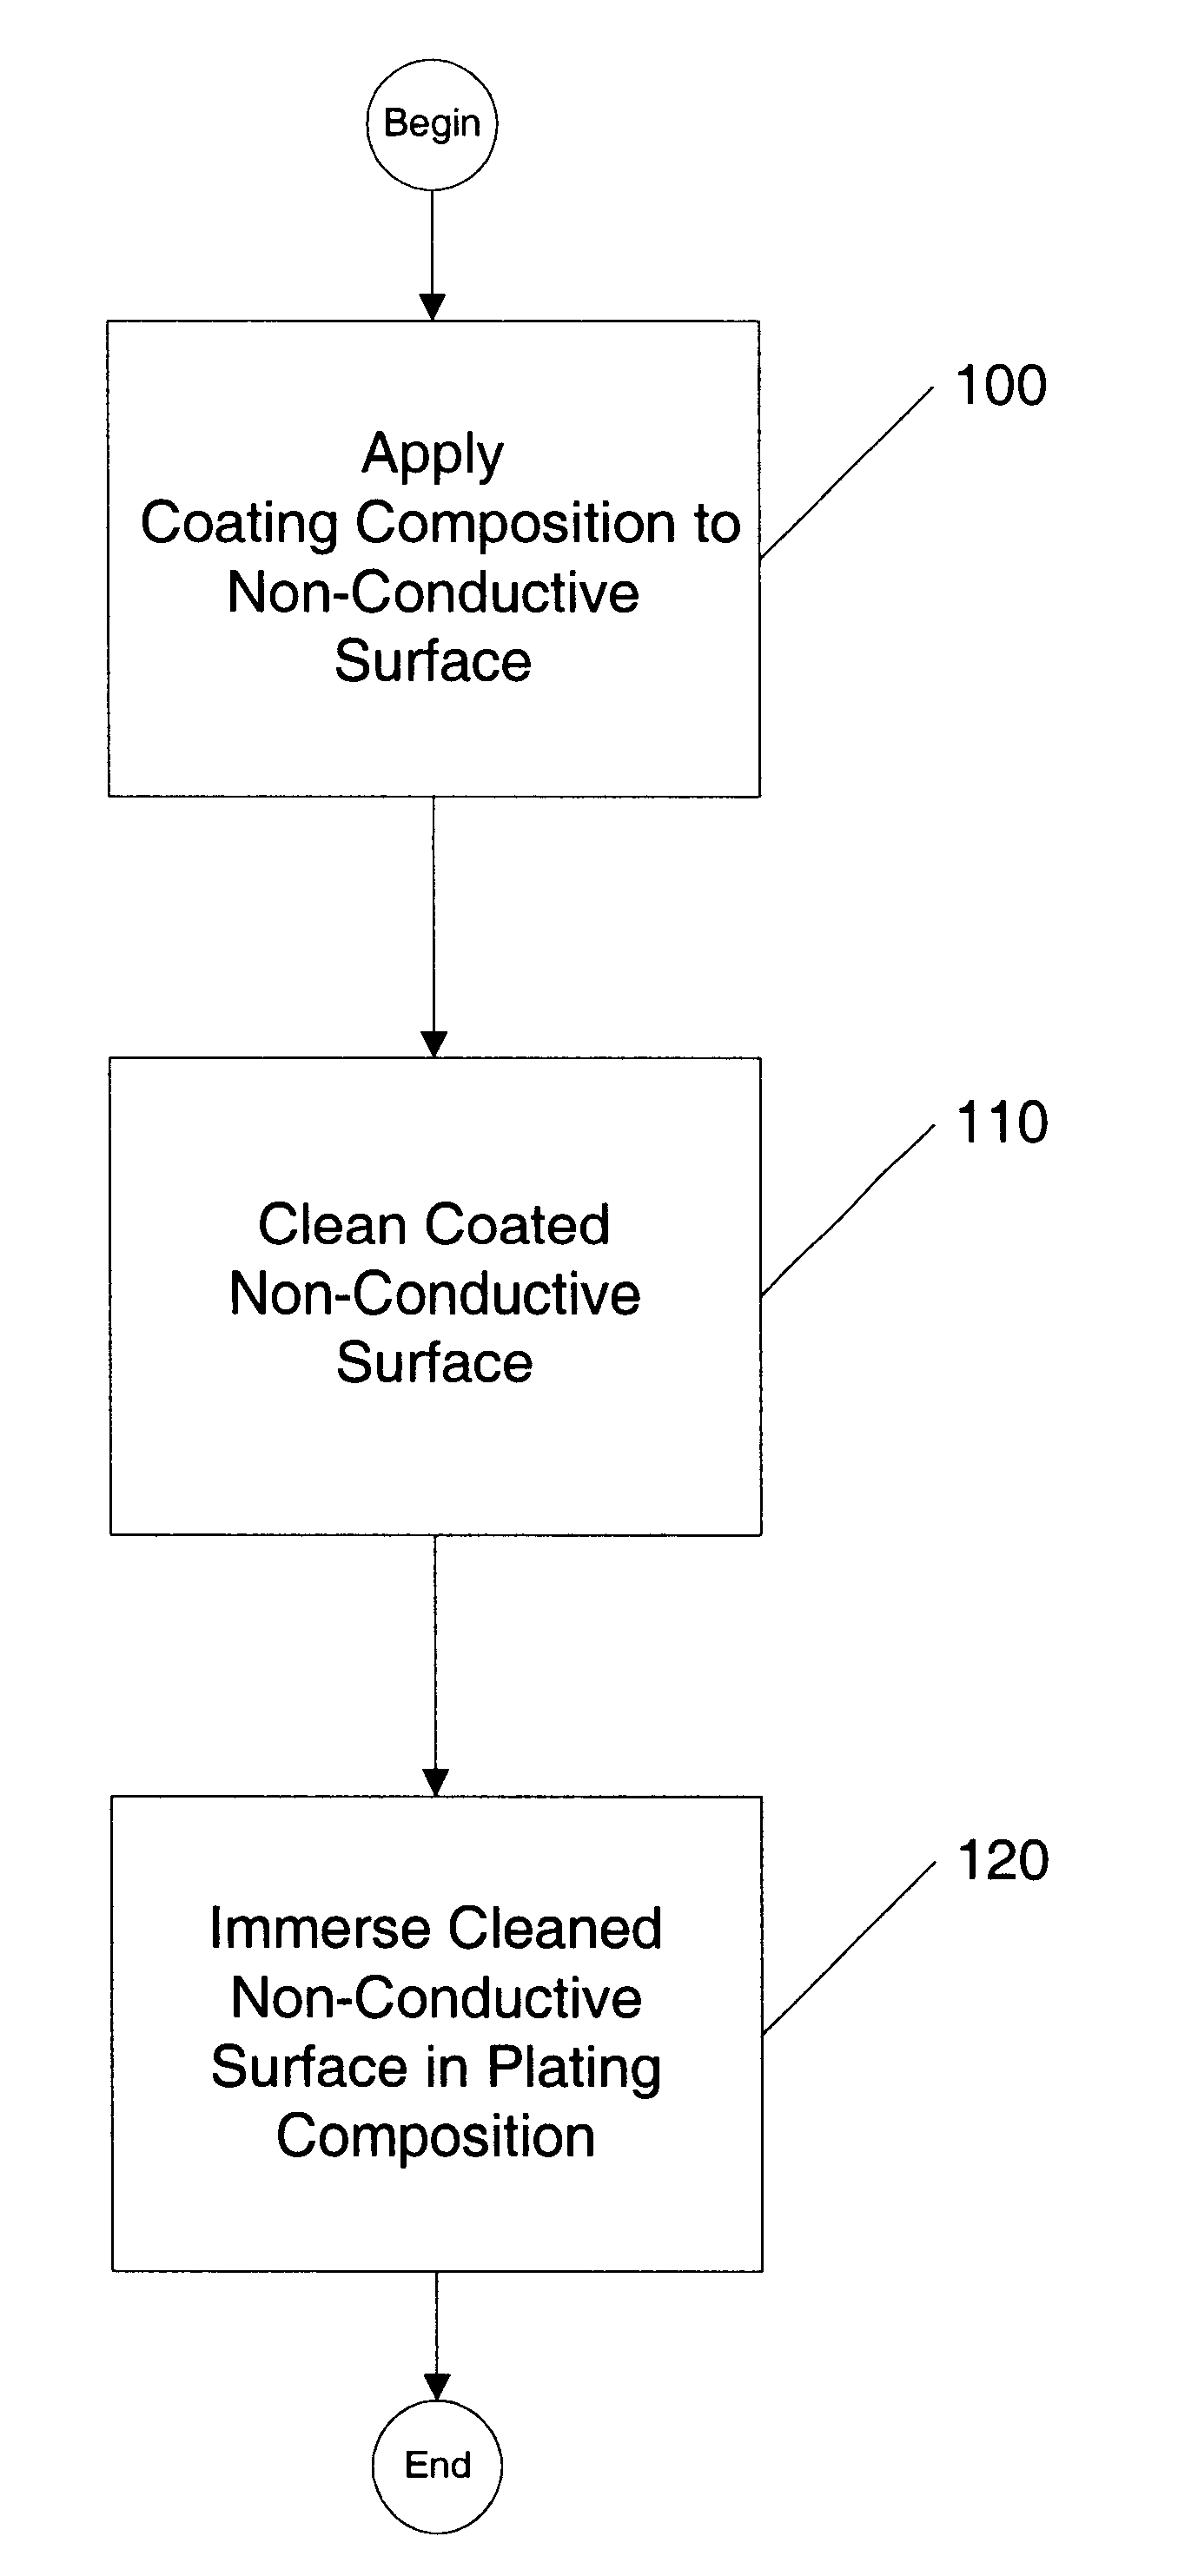 Composition and method for electroless plating of non-conductive substrates